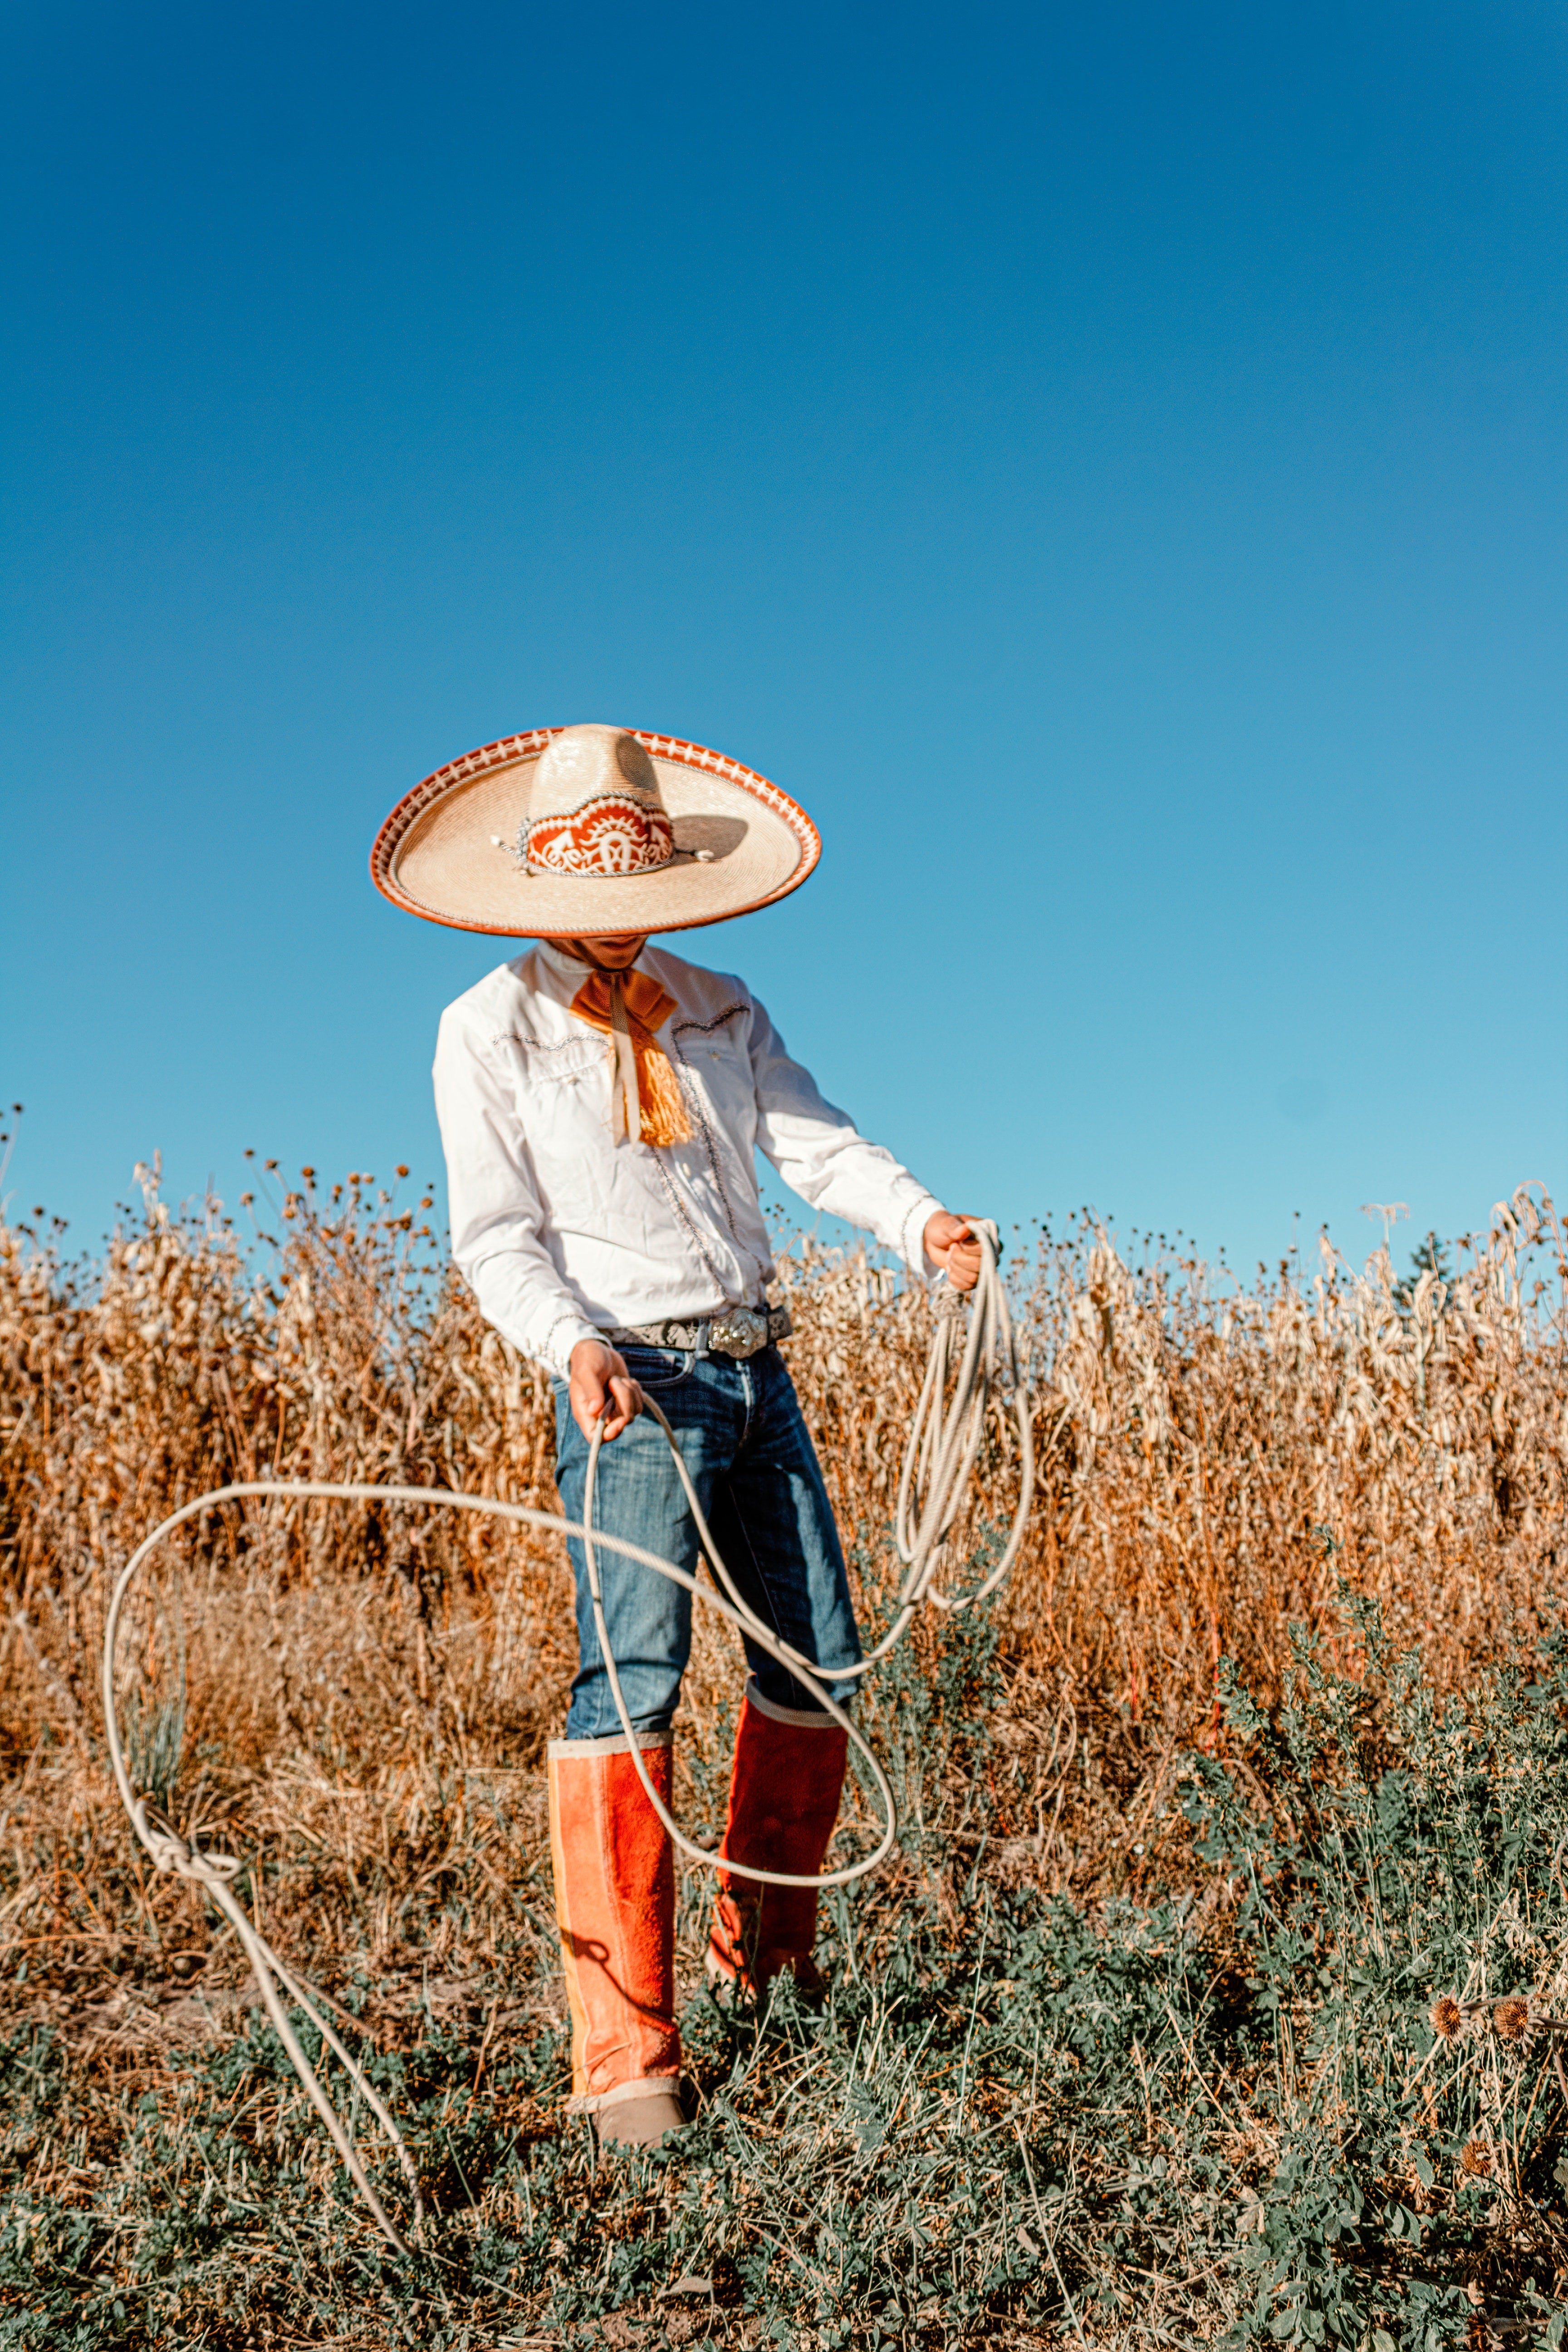 Man in a cowboy costume with a lasso in his hand